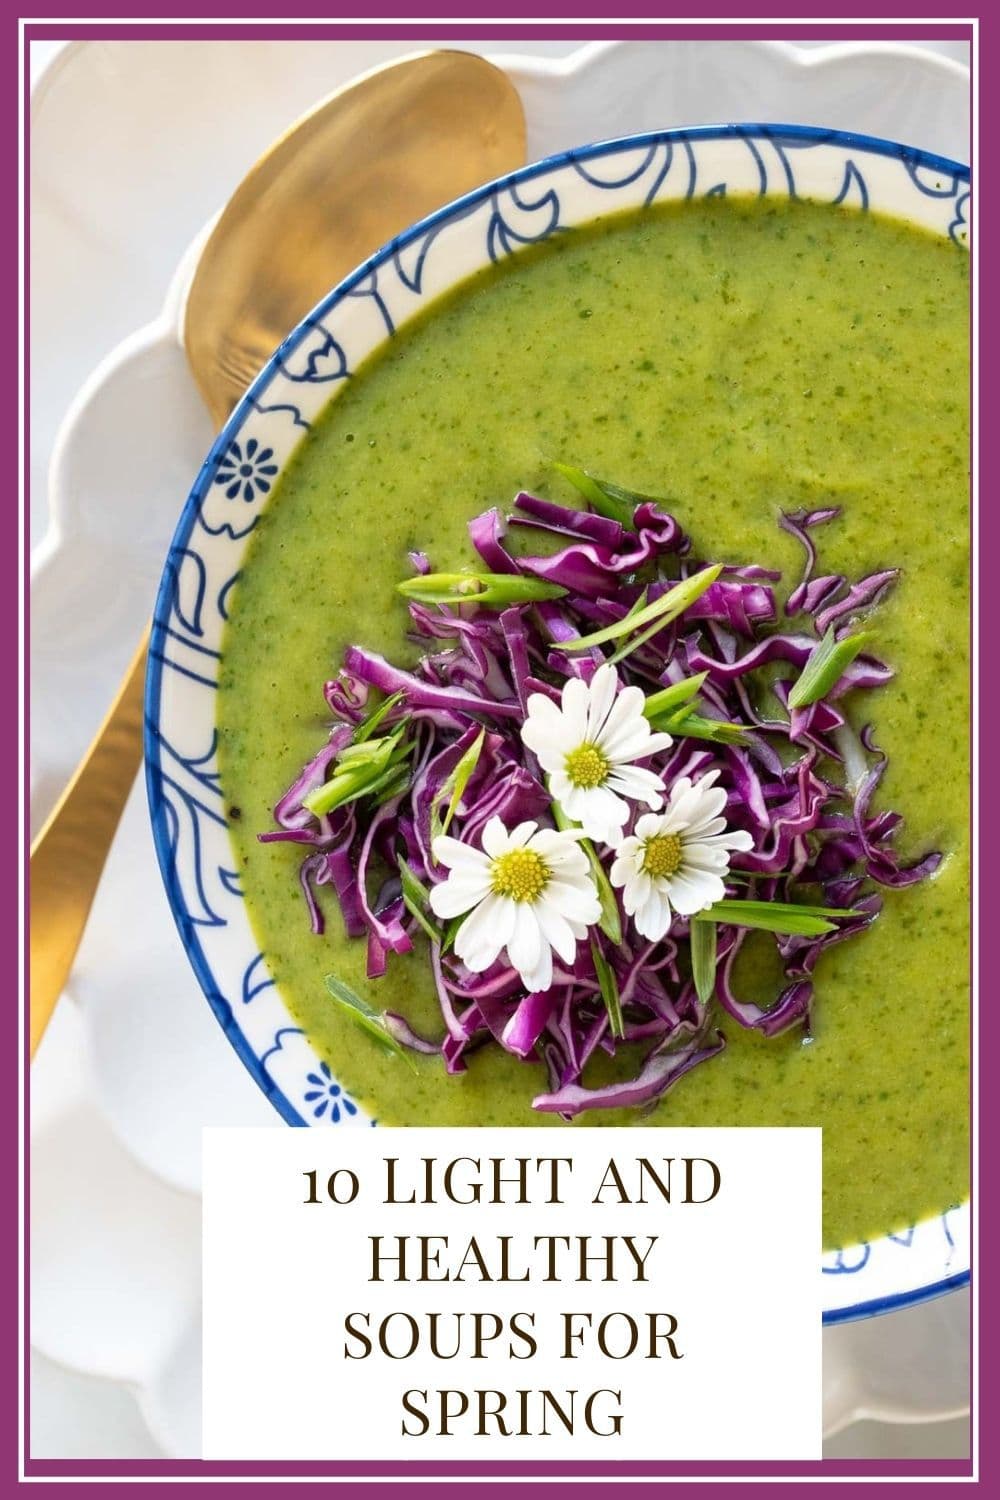 10 Fabulous Light and Healthy Soups to Welcome Spring